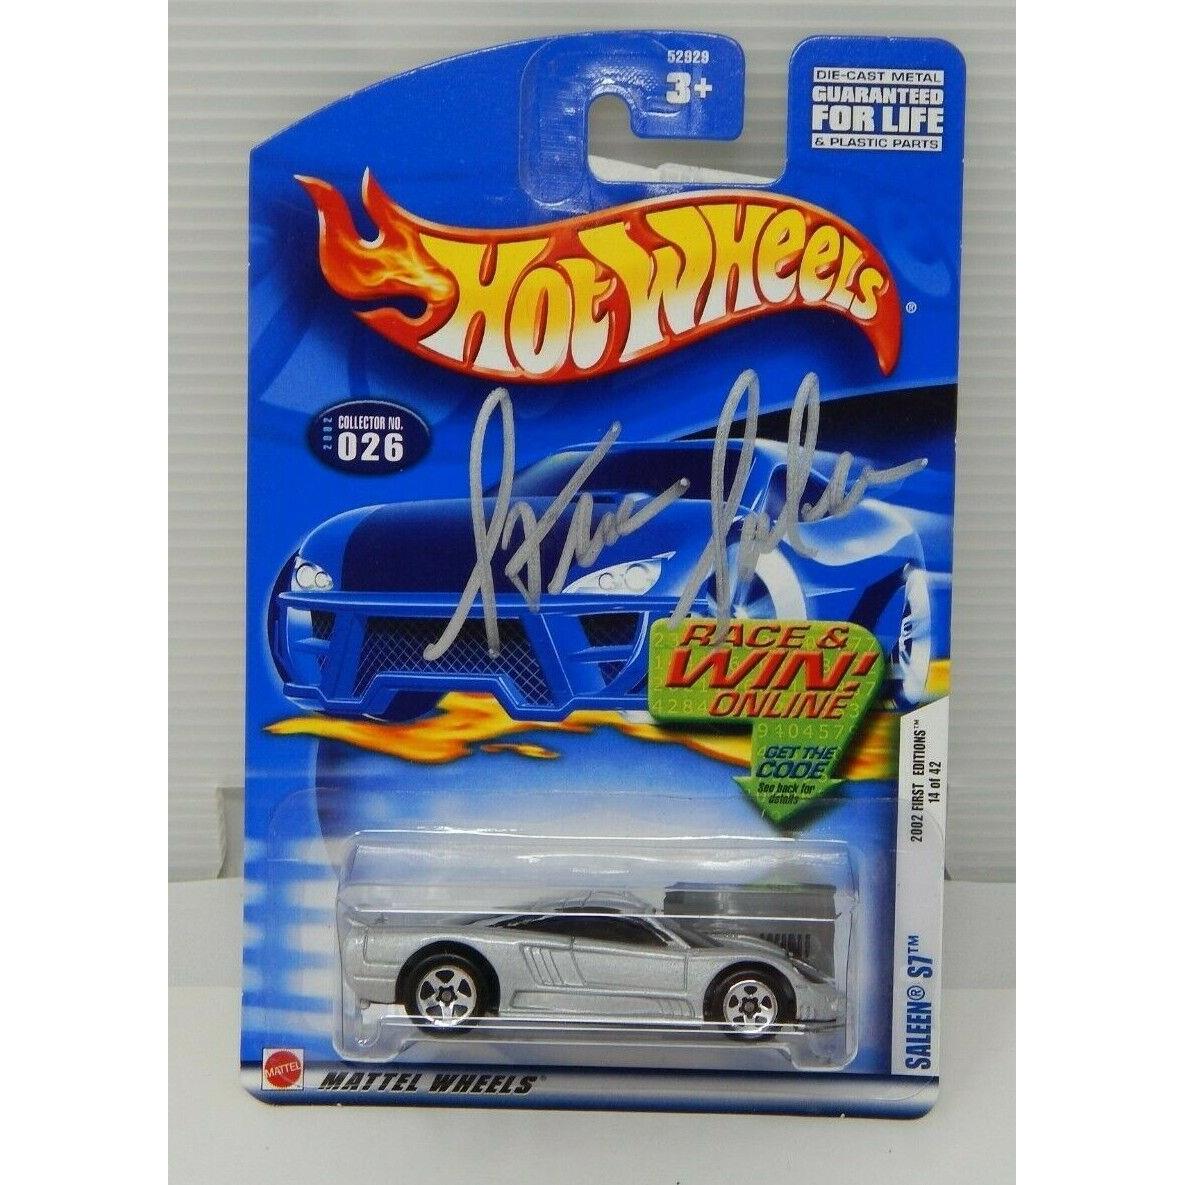 Hot Wheels Collector No. 026 Saleen S7 Signed by Steve Saleen 2002 First Edition